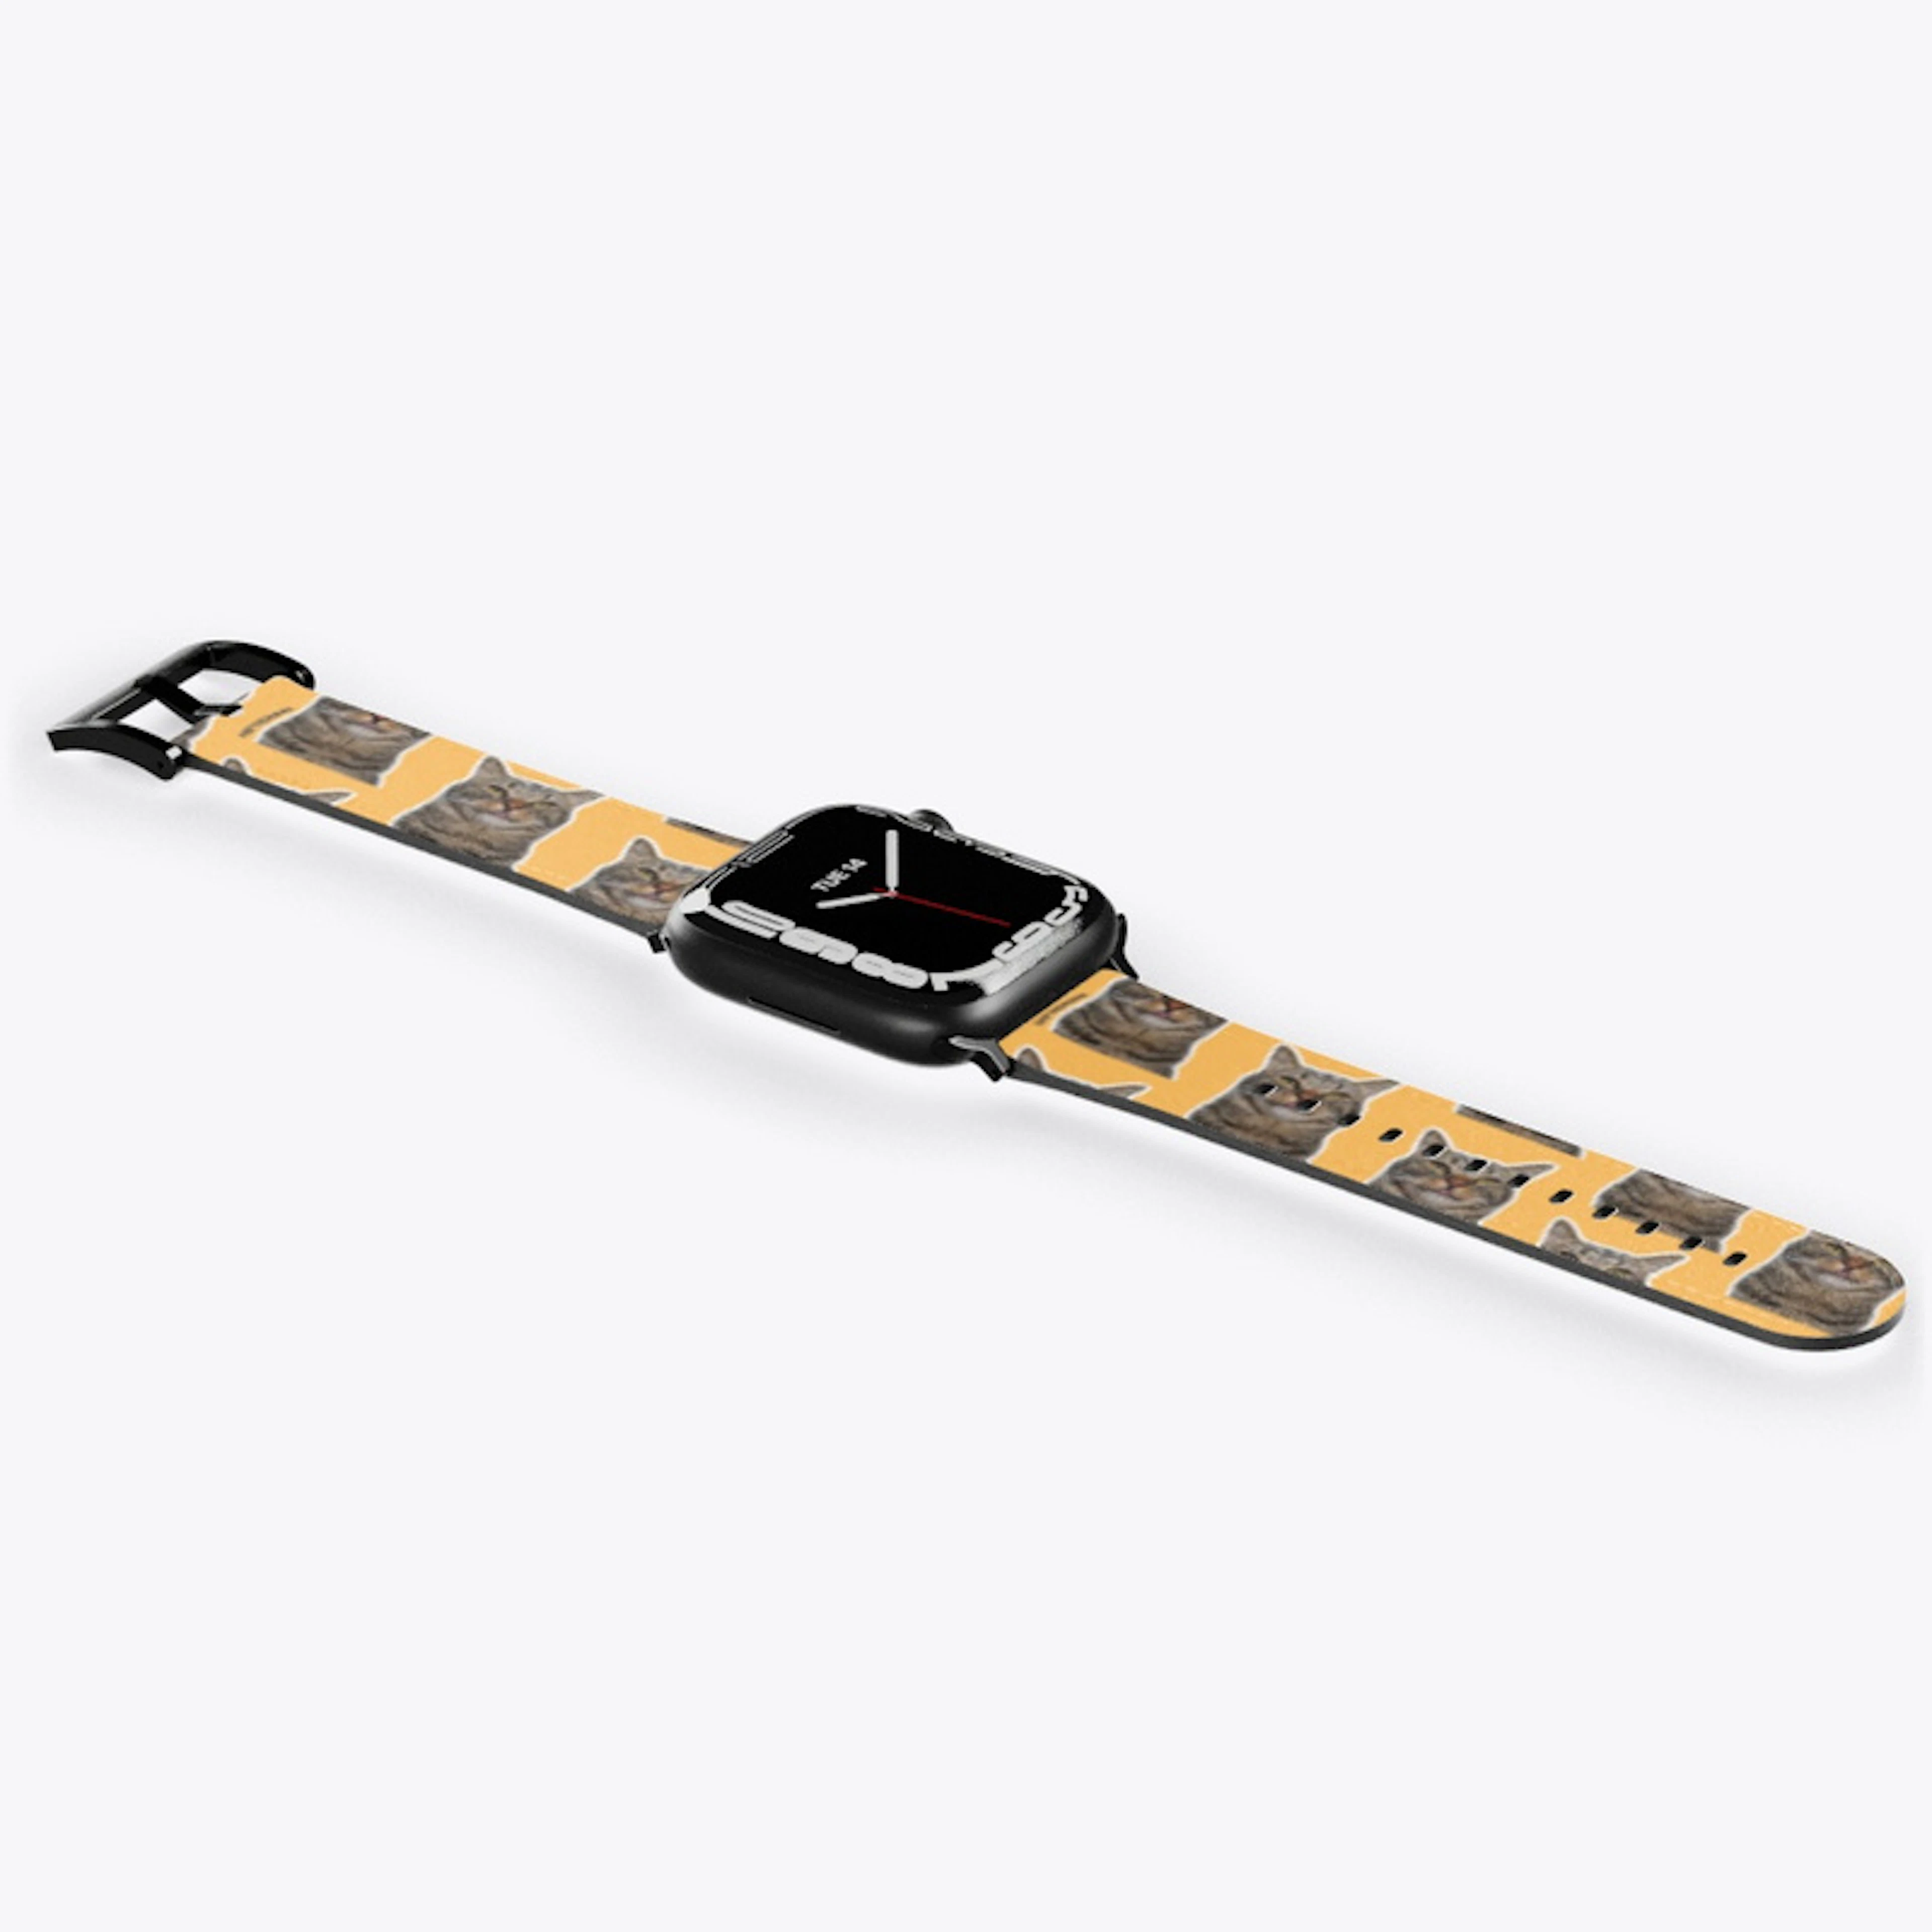 Official Chip The Manx Apple Watch Band